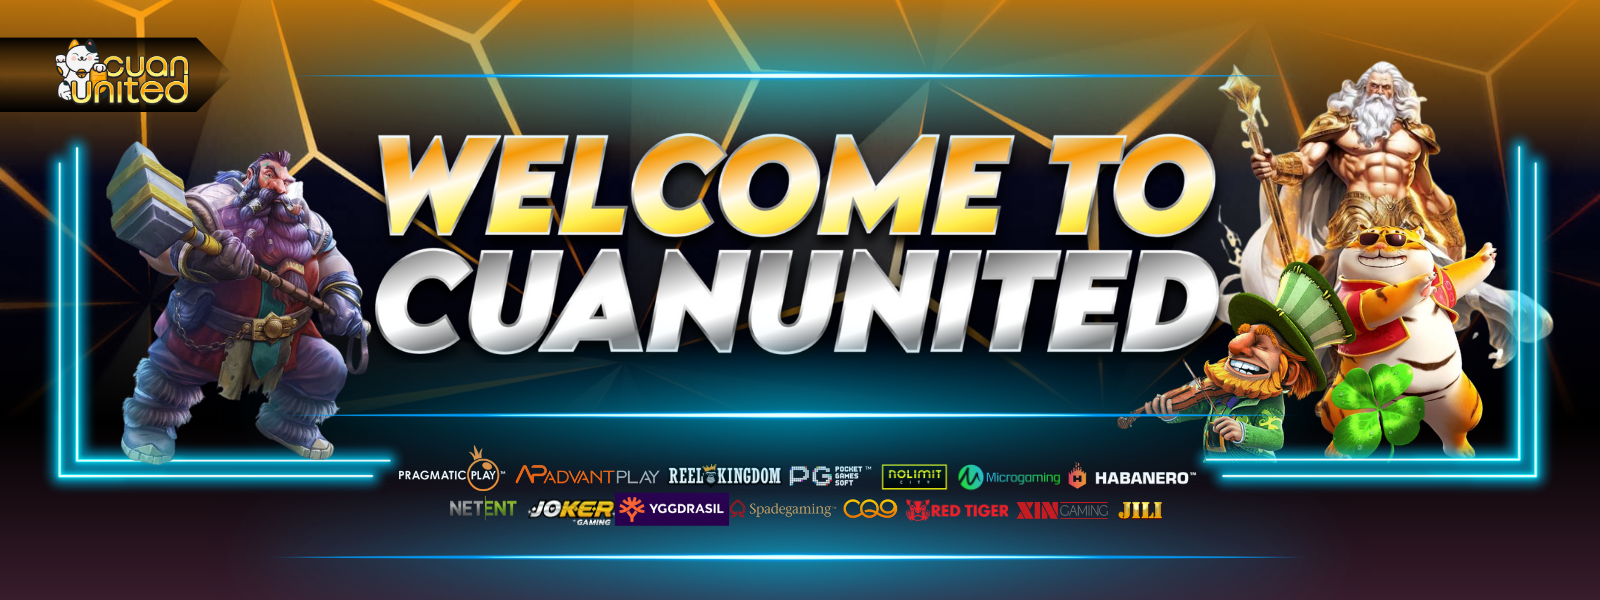 WELCOME BANNER CUANUNITED